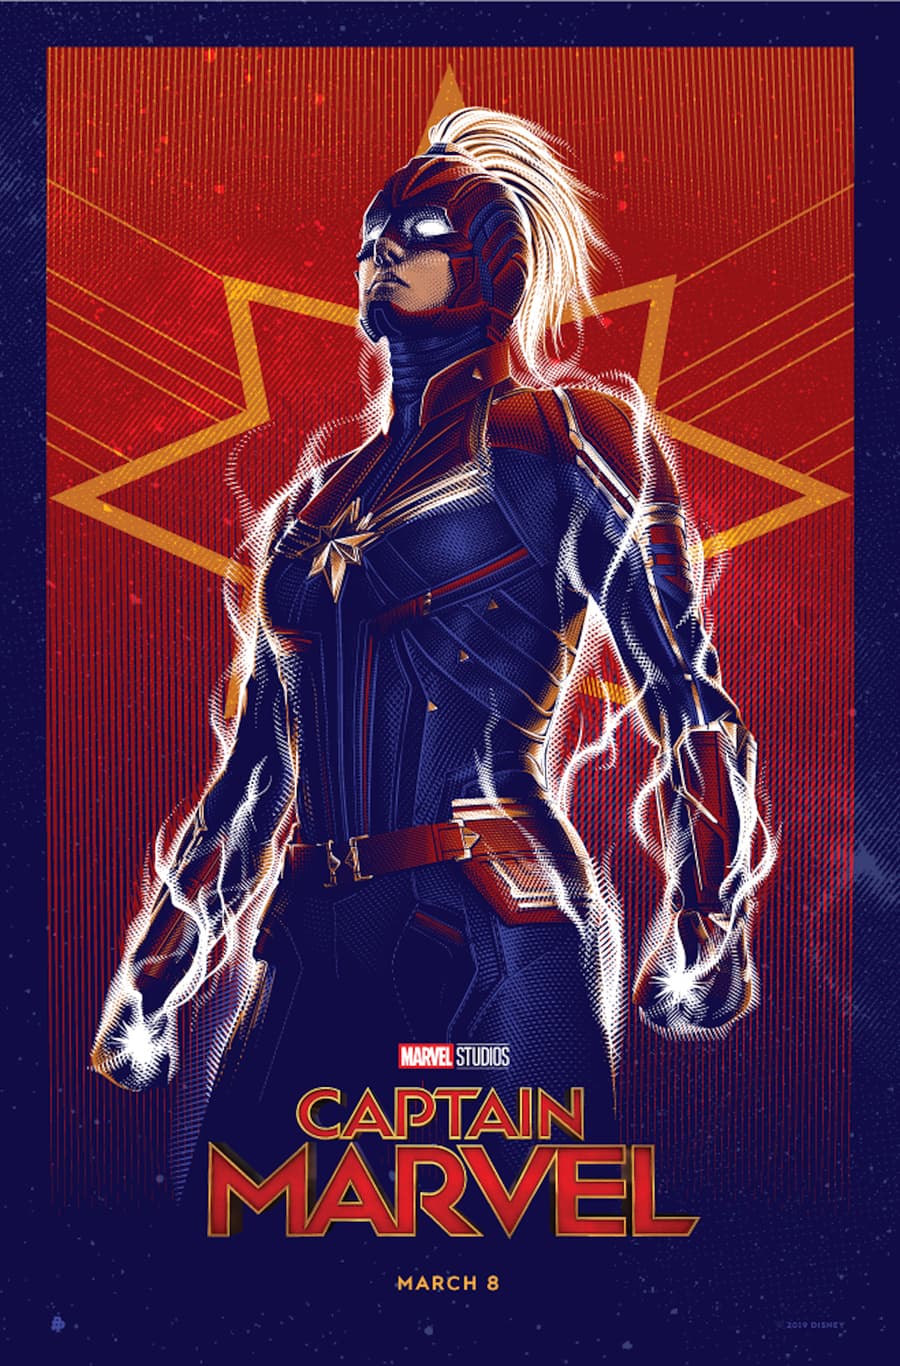 Captain Marvel Poster Art by Tracie Ching